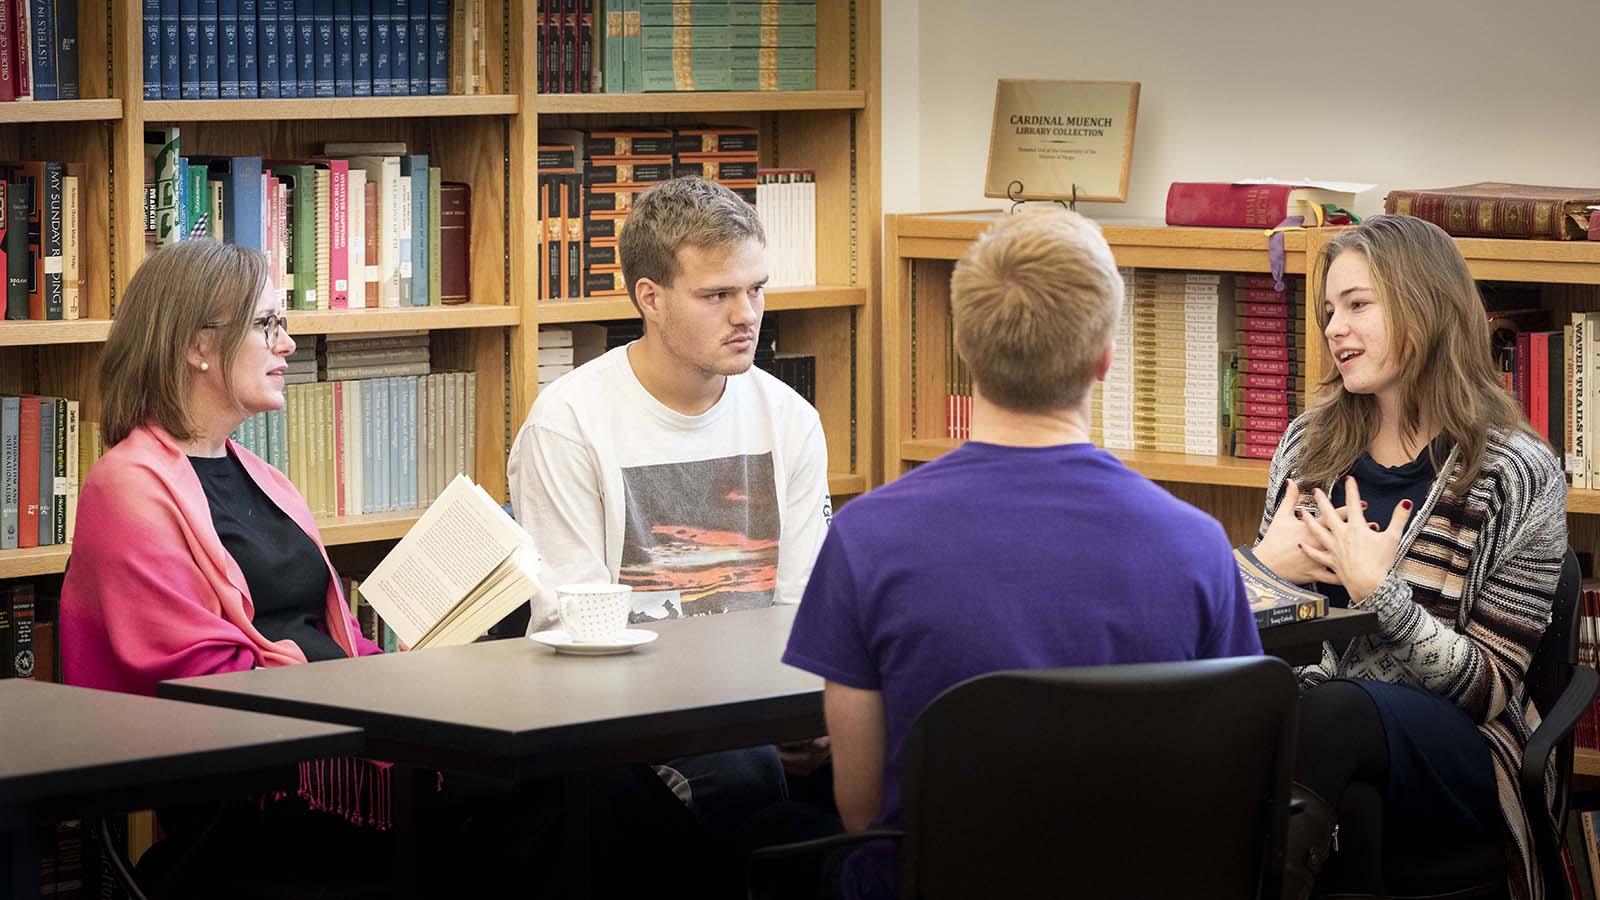 Three Catholic studies students in informal discussion with professor